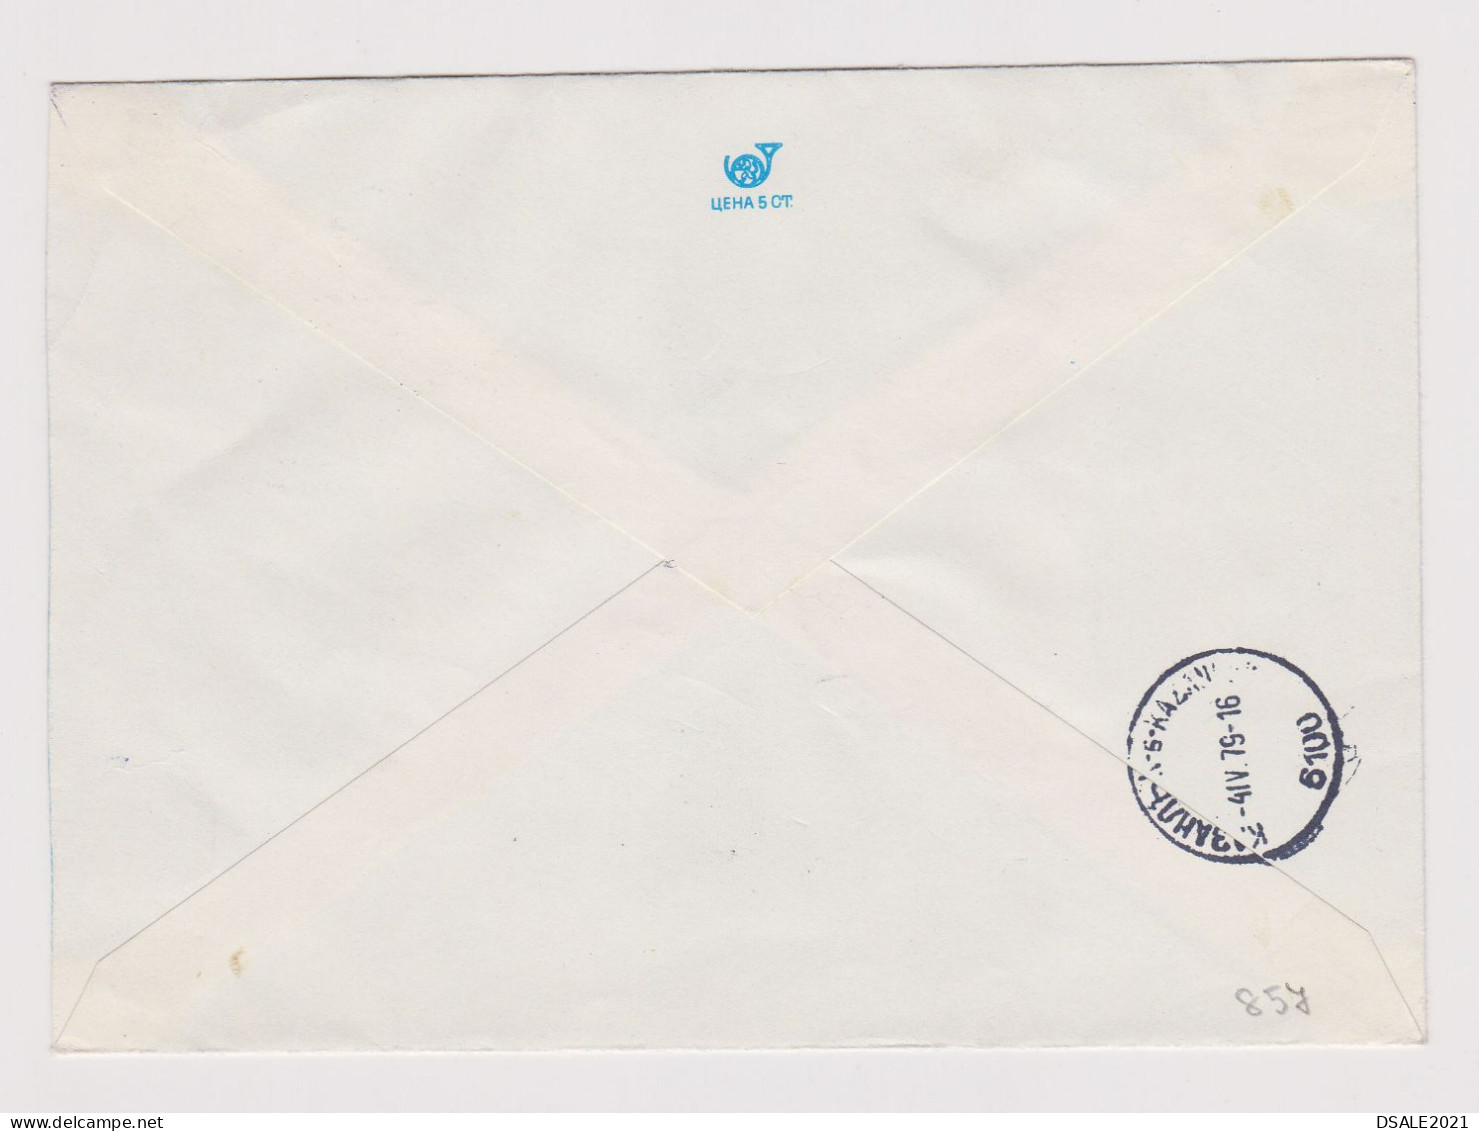 Bulgaria Bulgarien 1979 Ganzsachen R-Brief, Postal Stationery Cover, Registered W/Topic Stamps Flower, Architecture /857 - Enveloppes